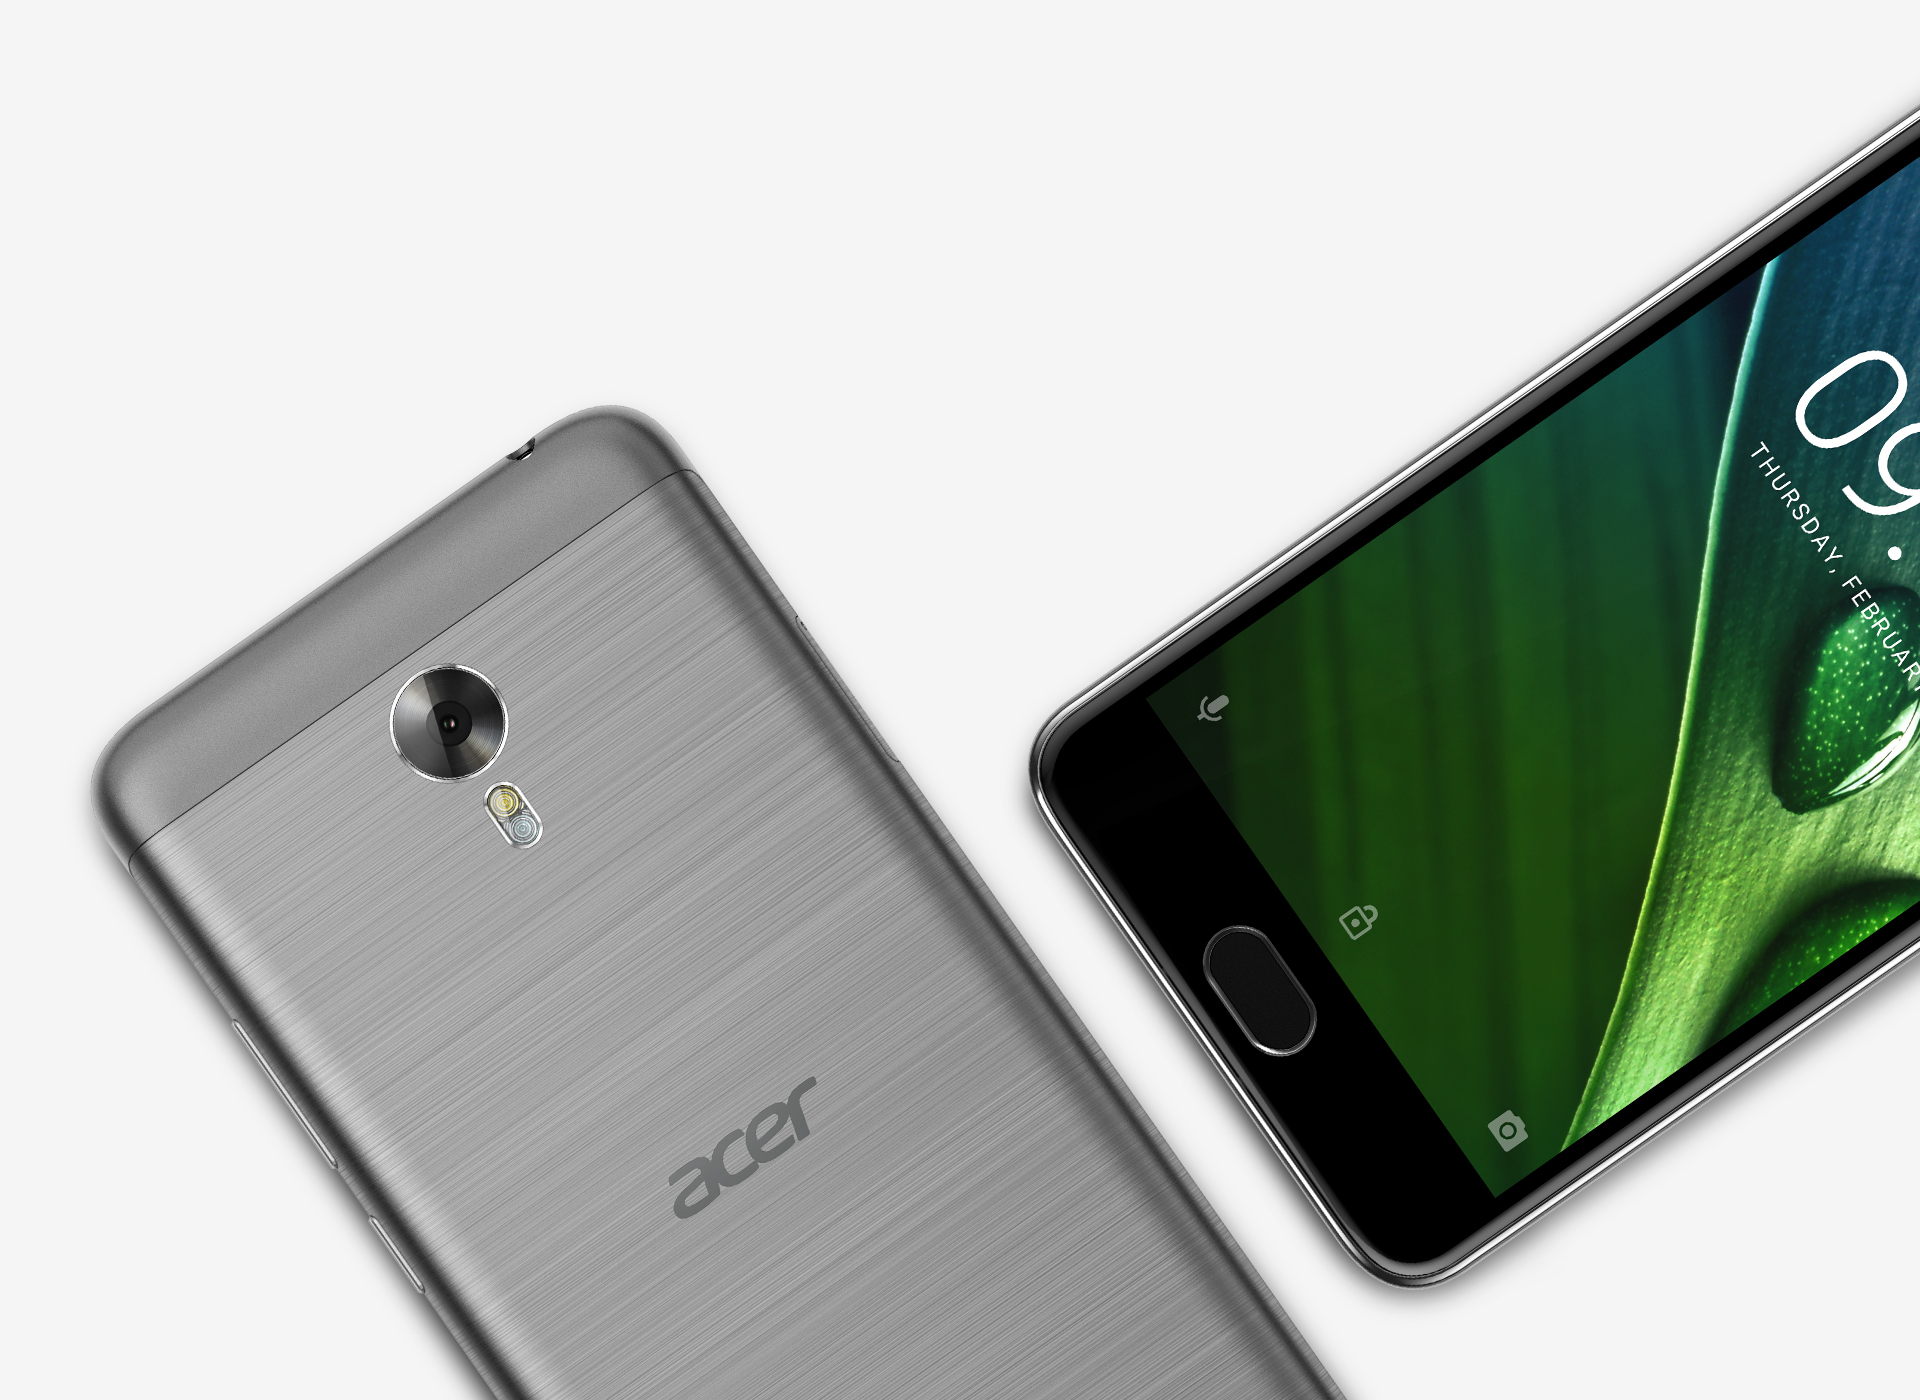 Uninstall Magisk and Unroot your Acer Liquid Z6